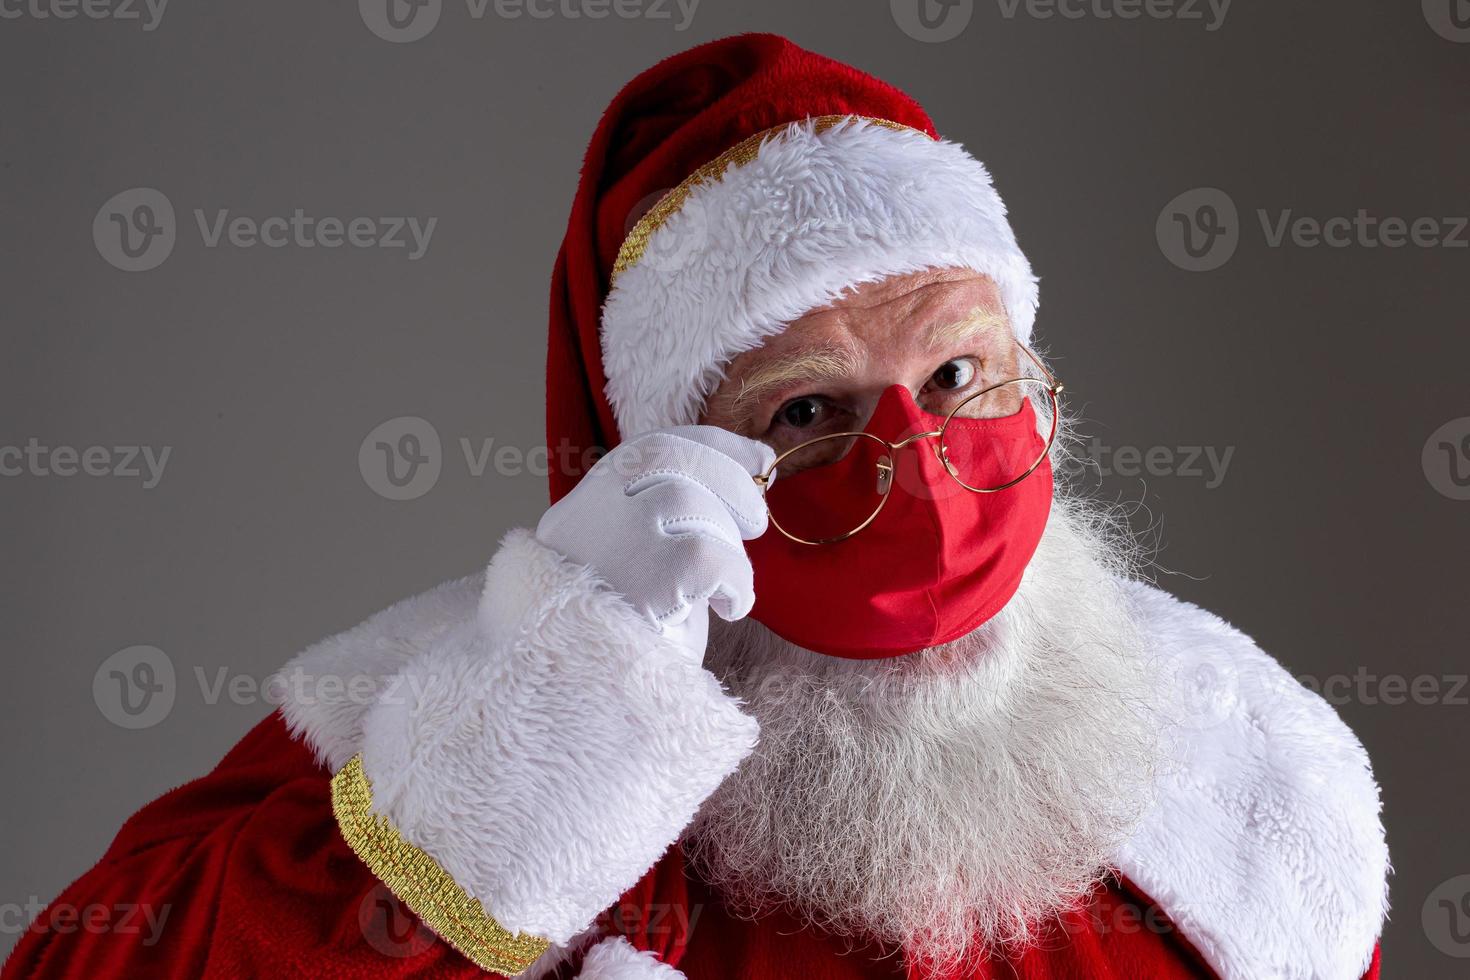 Santa Claus smiles behind red Covid-19 safety face mask. Christmas with social distance. photo